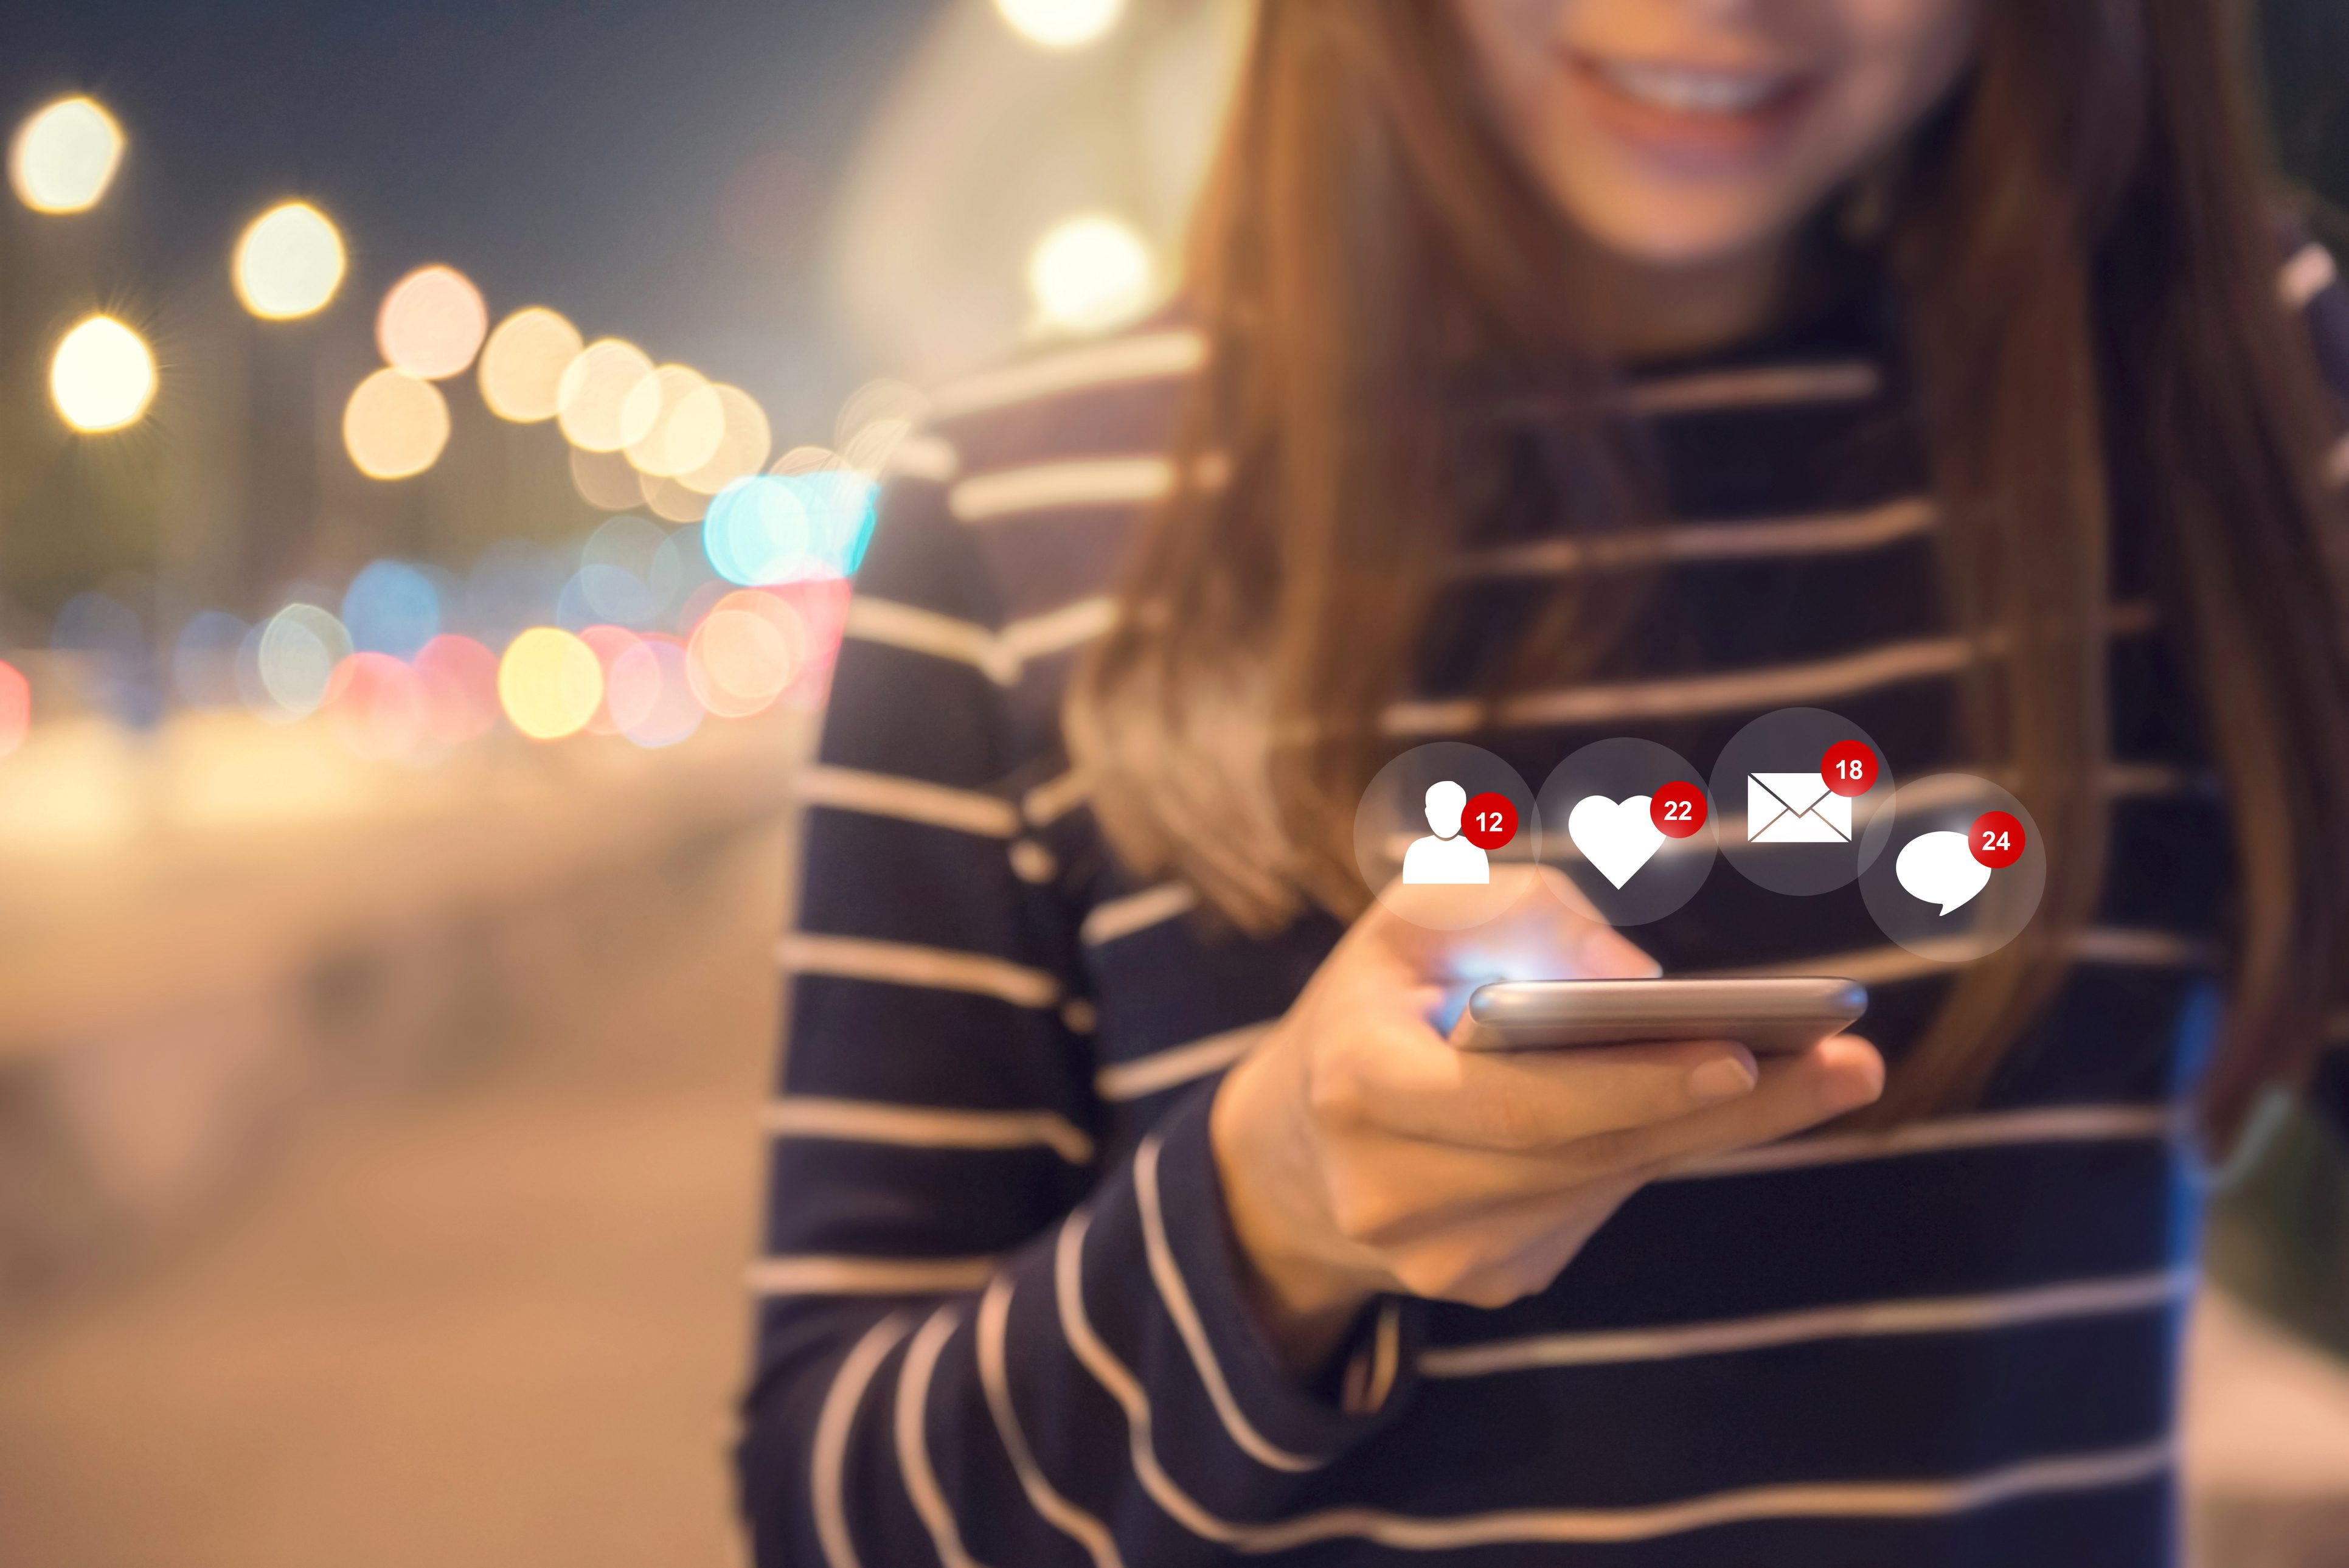 Girls Online Dating: How Many Messages Do You Actually Get?